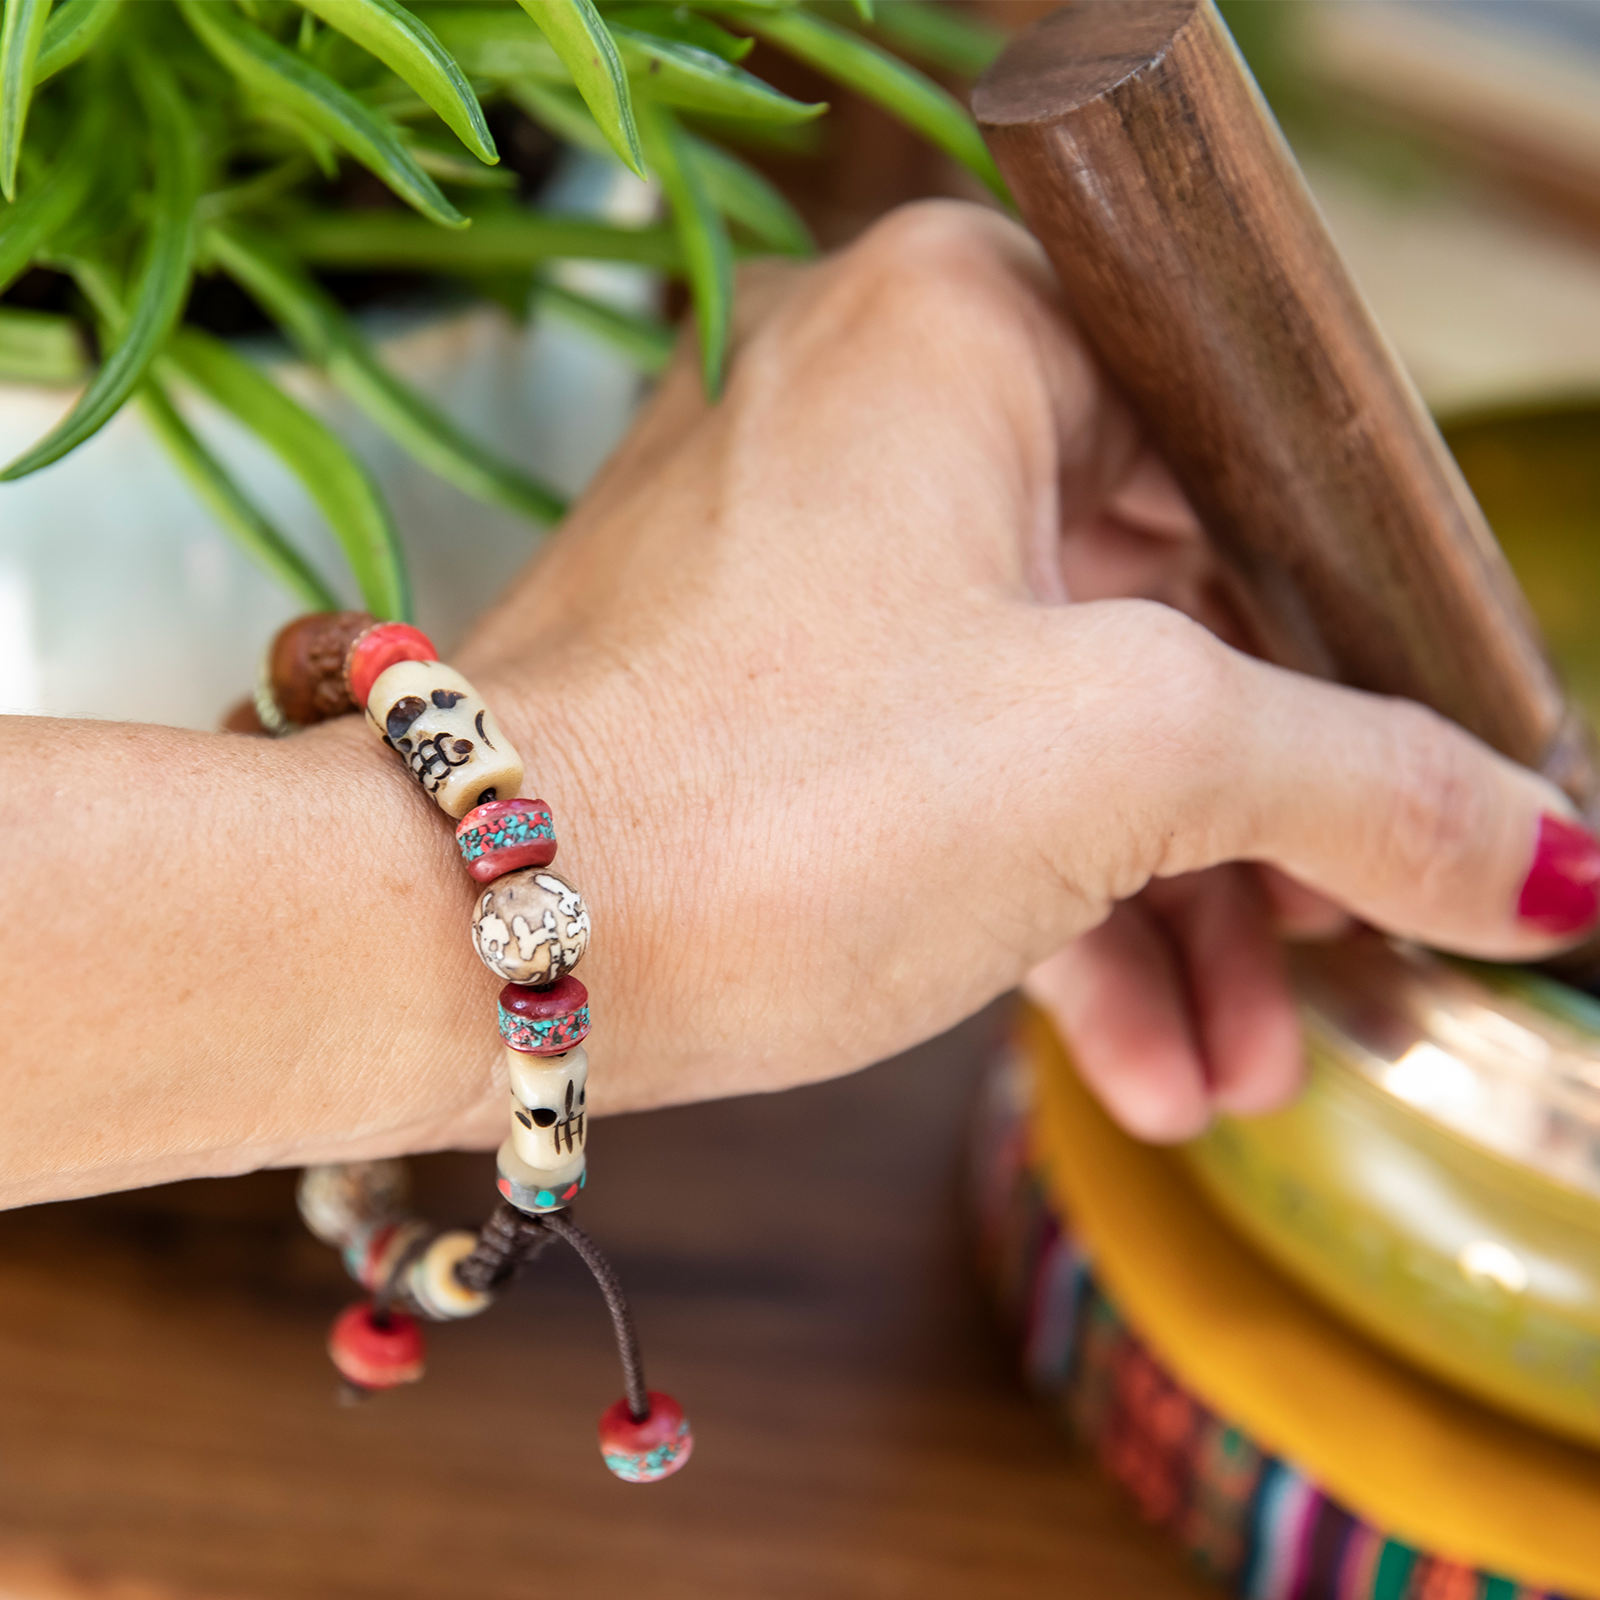 Close-up of woman's wrist wearing Shaman Bracelet as she reaches for a singing bowl mallet.